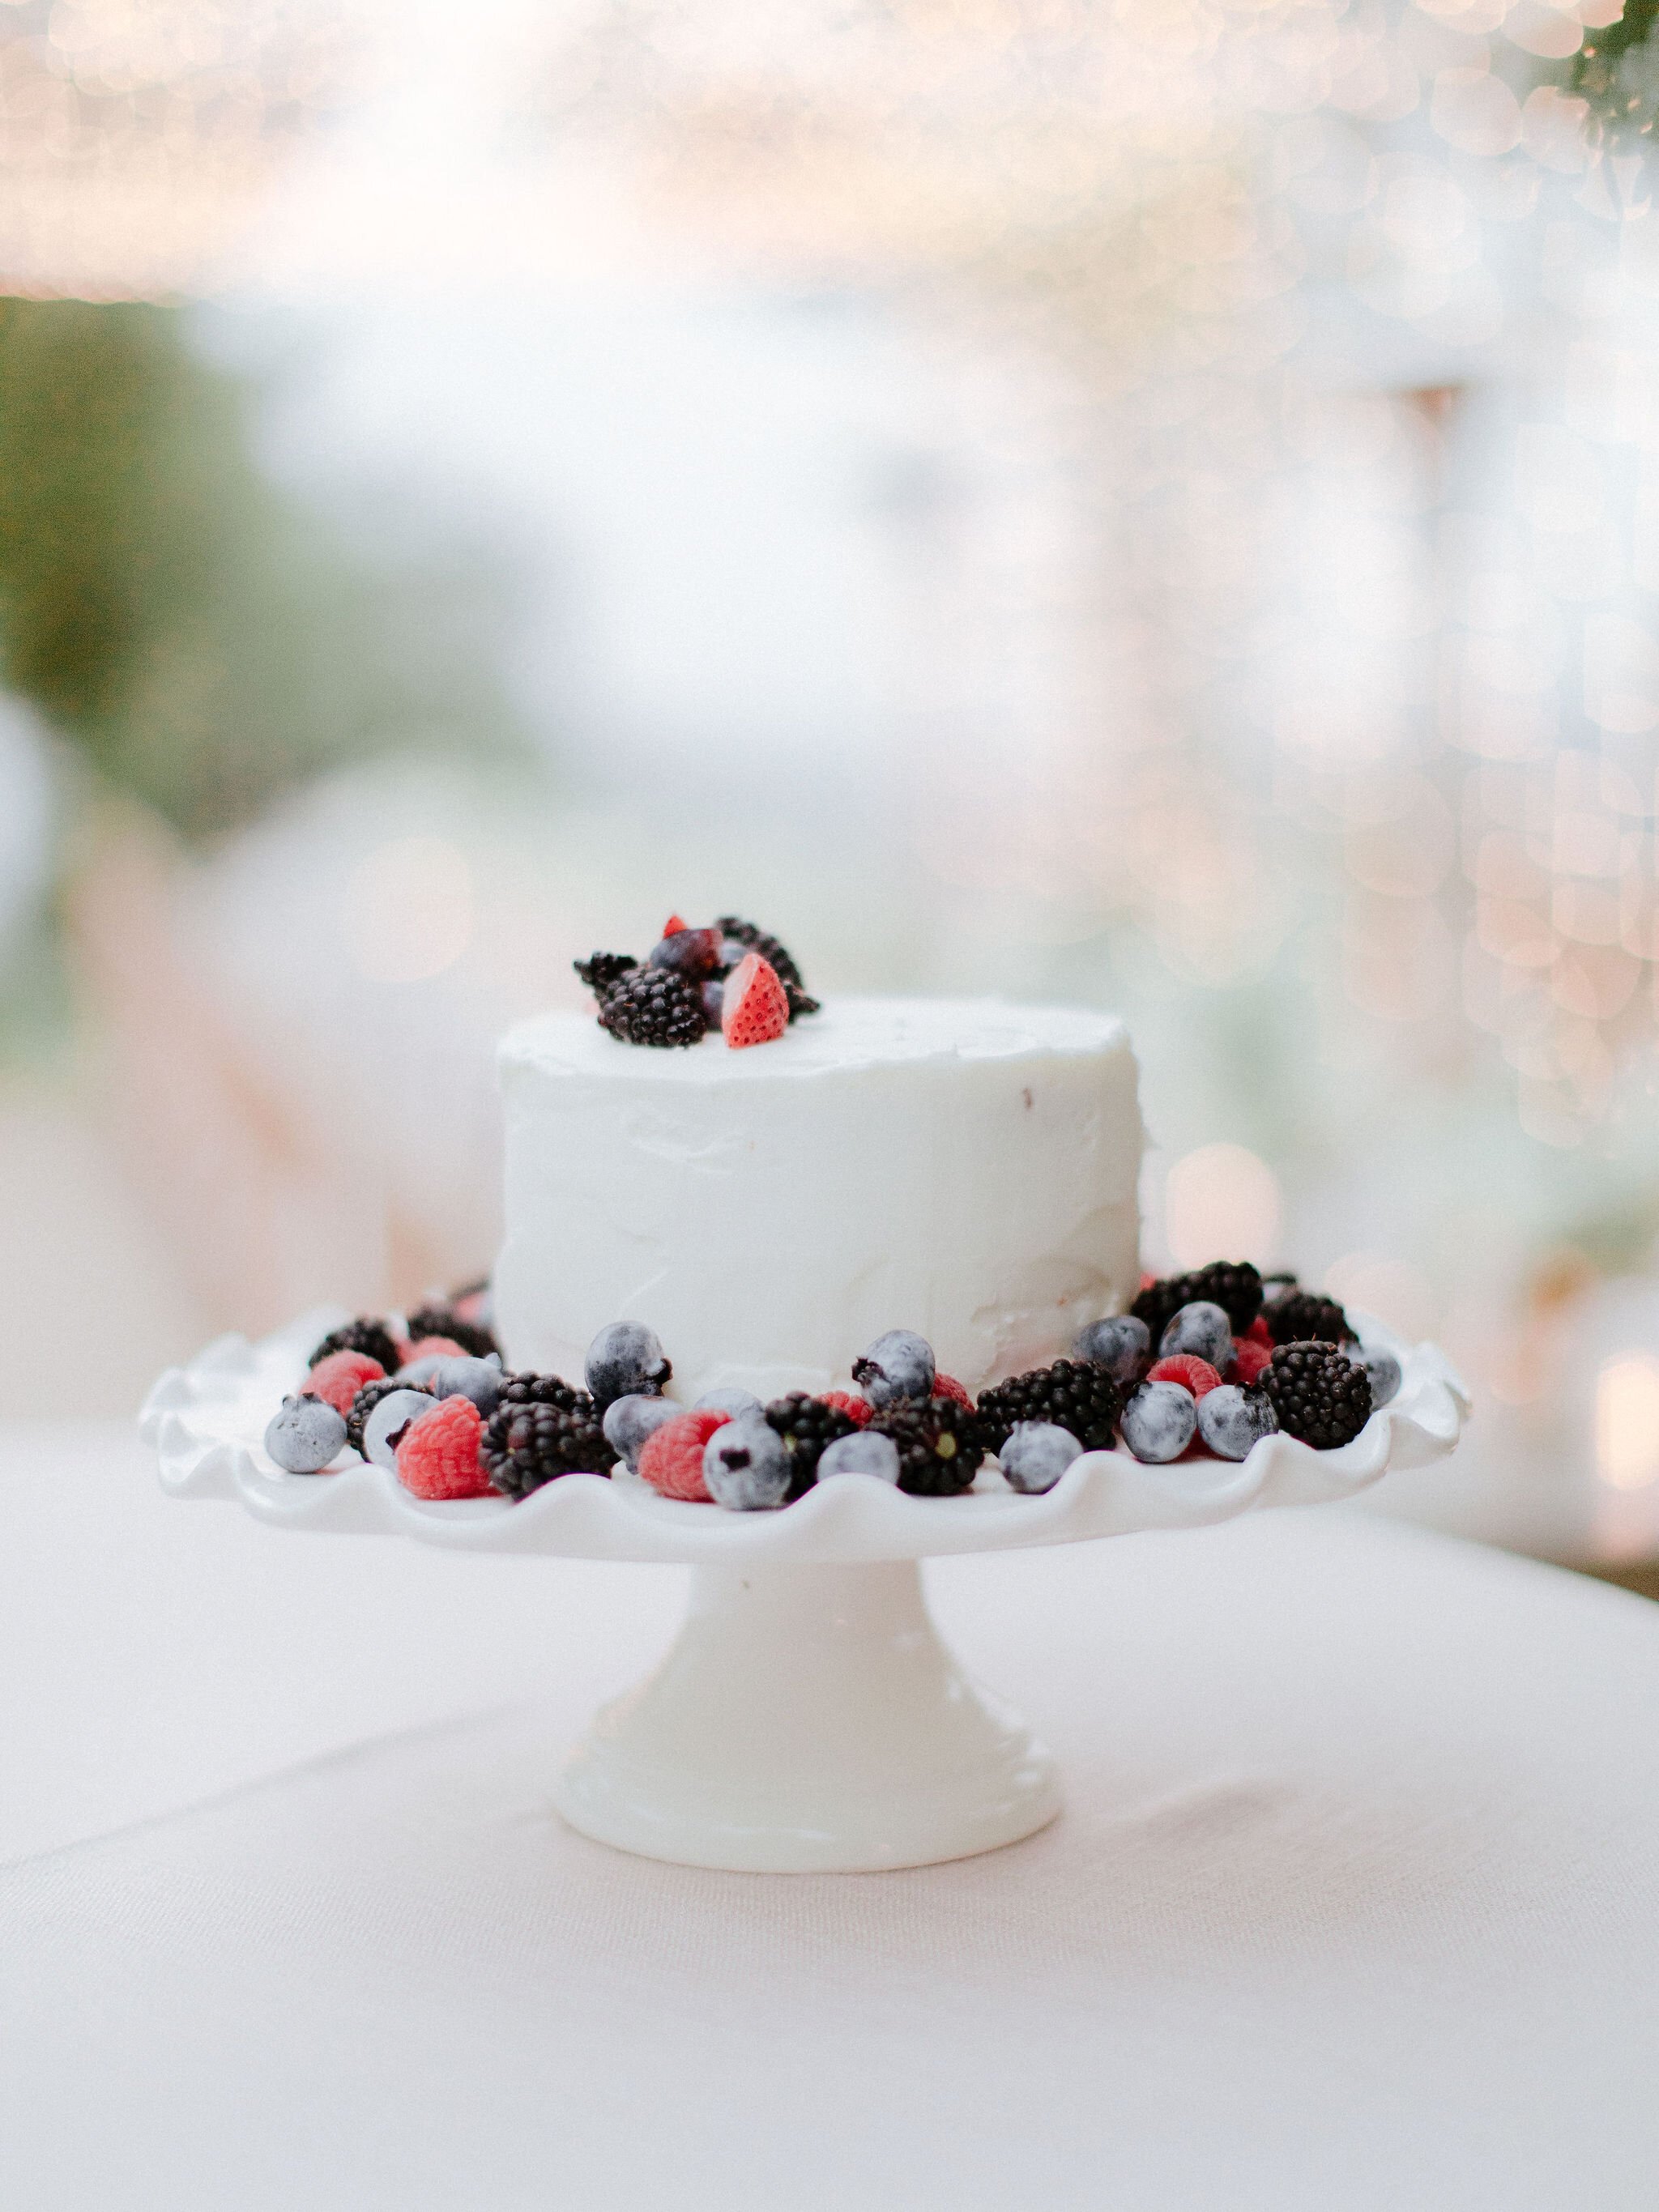 www.santabarbaraweddings.com | Chris J. Evans | Private Residence | Ashley Chanel Events | Rogue &amp; Fox | Wedding Cake with Berries